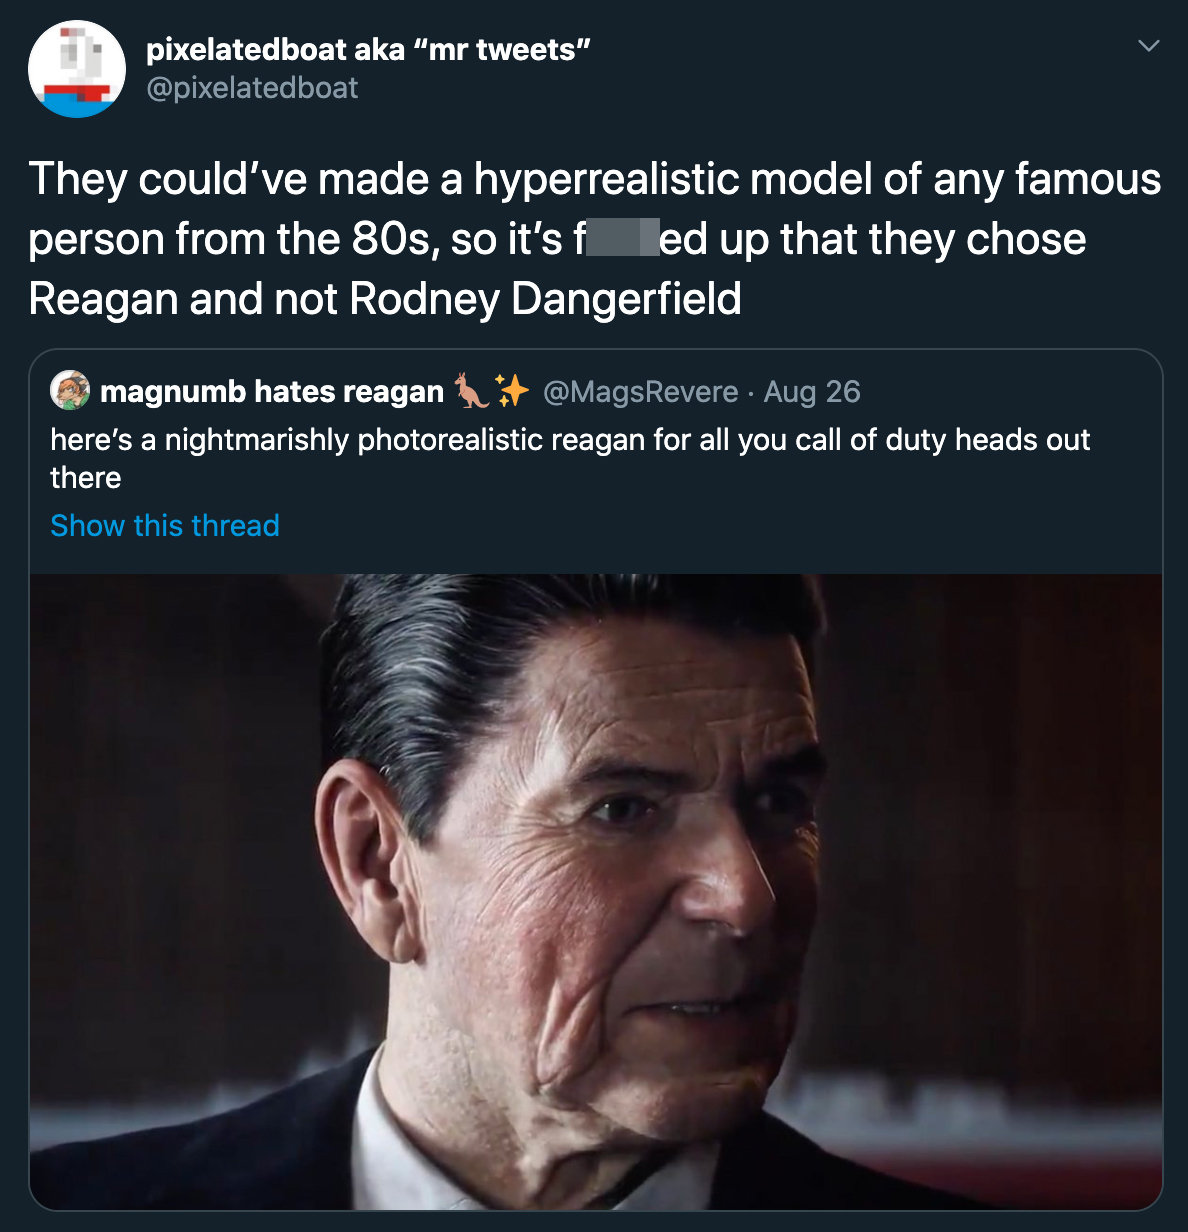 they could've made a hyperrealistic model of any famous person from the 80s, so it's fucked up that they chose ronald reagan and not rodney dangerfield